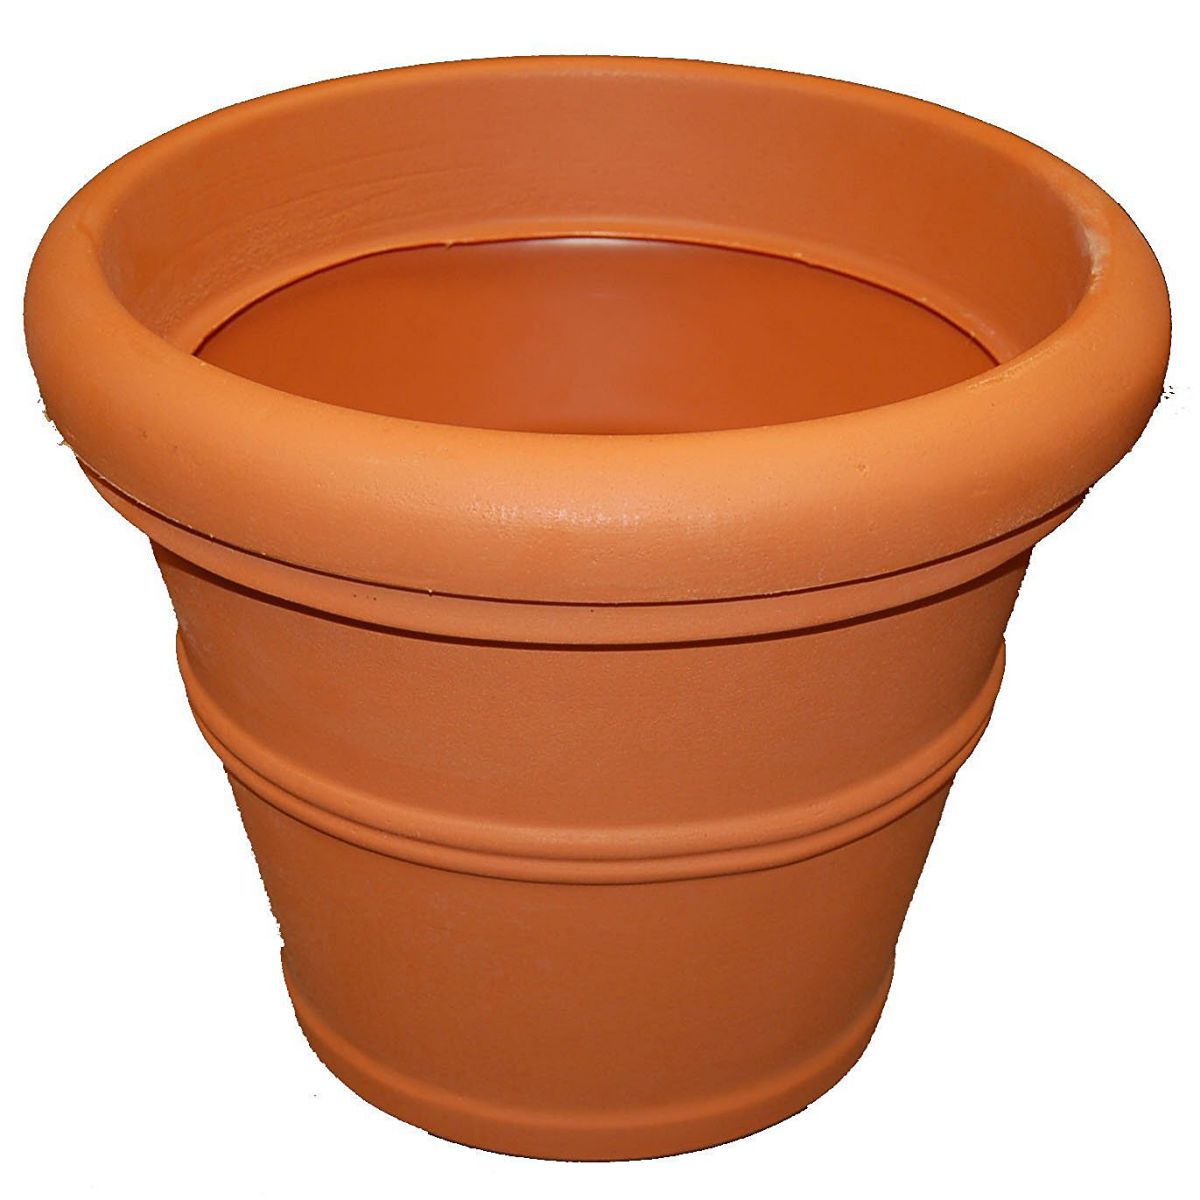 Tusco Products T20 Rolled Rim Pot, Round, Terra Cotta, 20-Inch, Large Size